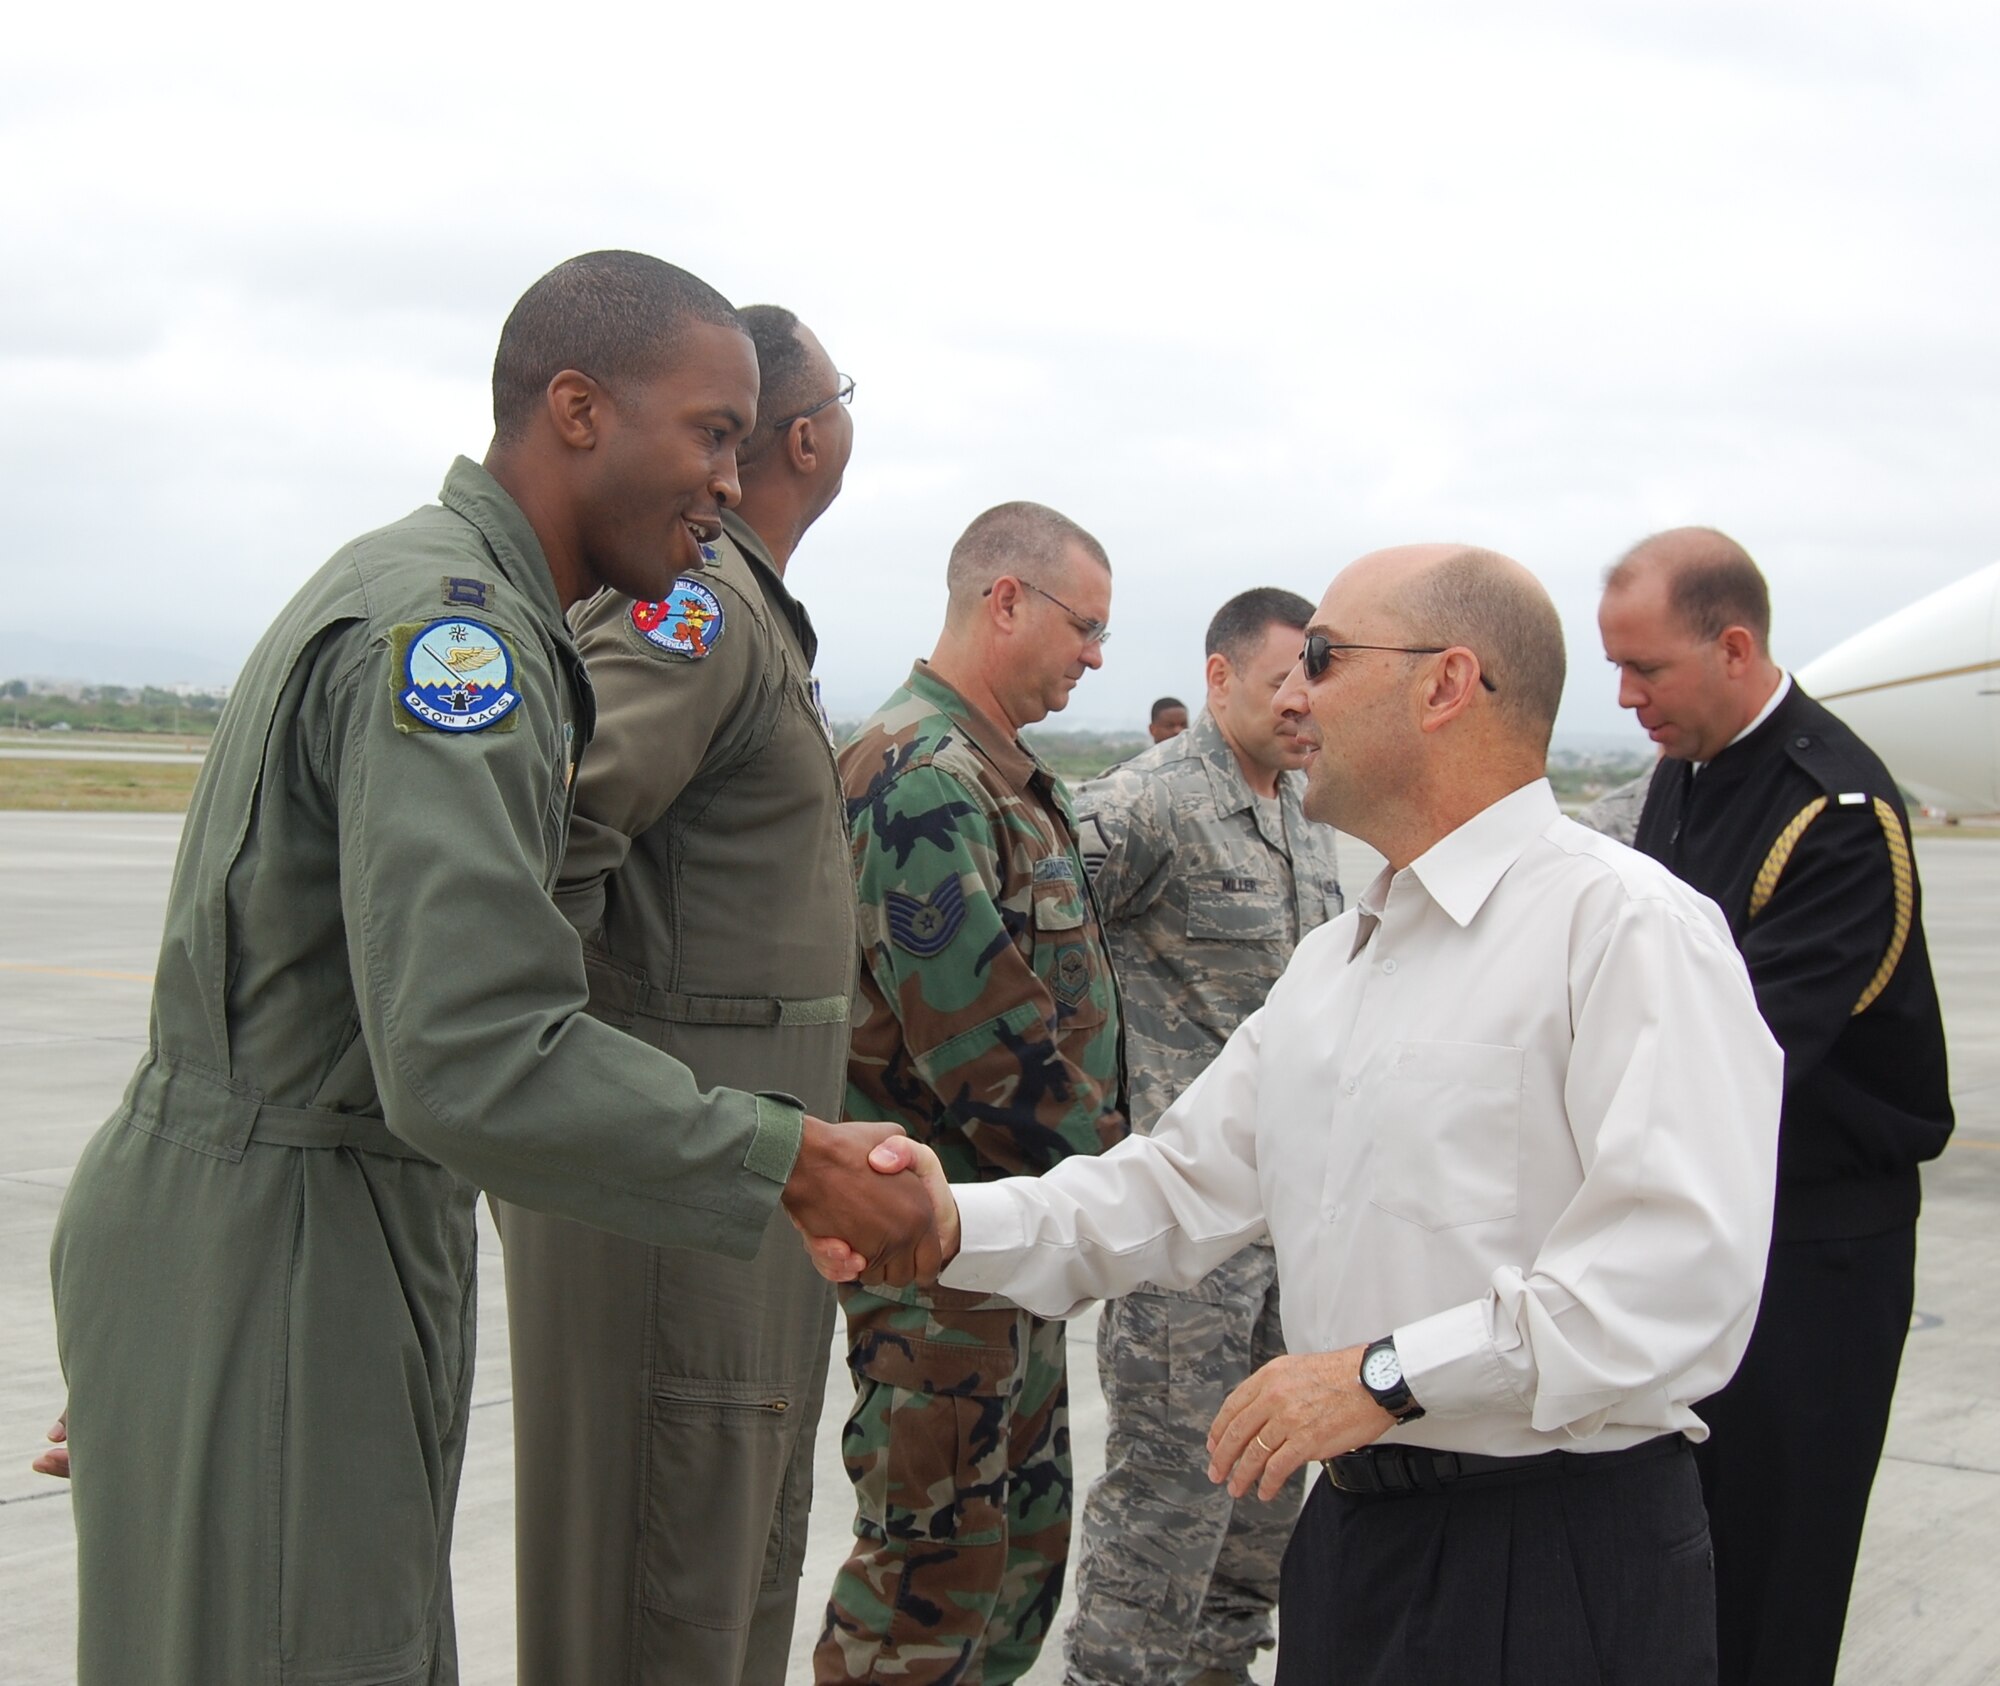 Admiral James Stavridis, U.S. Southern Command commander, greets Captain Lonzo Wallace, the Director of Operations for the 960th Airborne Warning and Control System detachment deployed to Forward Operating Location Manta, Ecuador.  Capt. Wallace was coined by the Admiral for being a top performer.  Admiral Stavridis spent several hours visiting with Airmen and getting a tour of the FOL on June 12.  (U.S. Air Force photo/Capt. Ashley Norris)